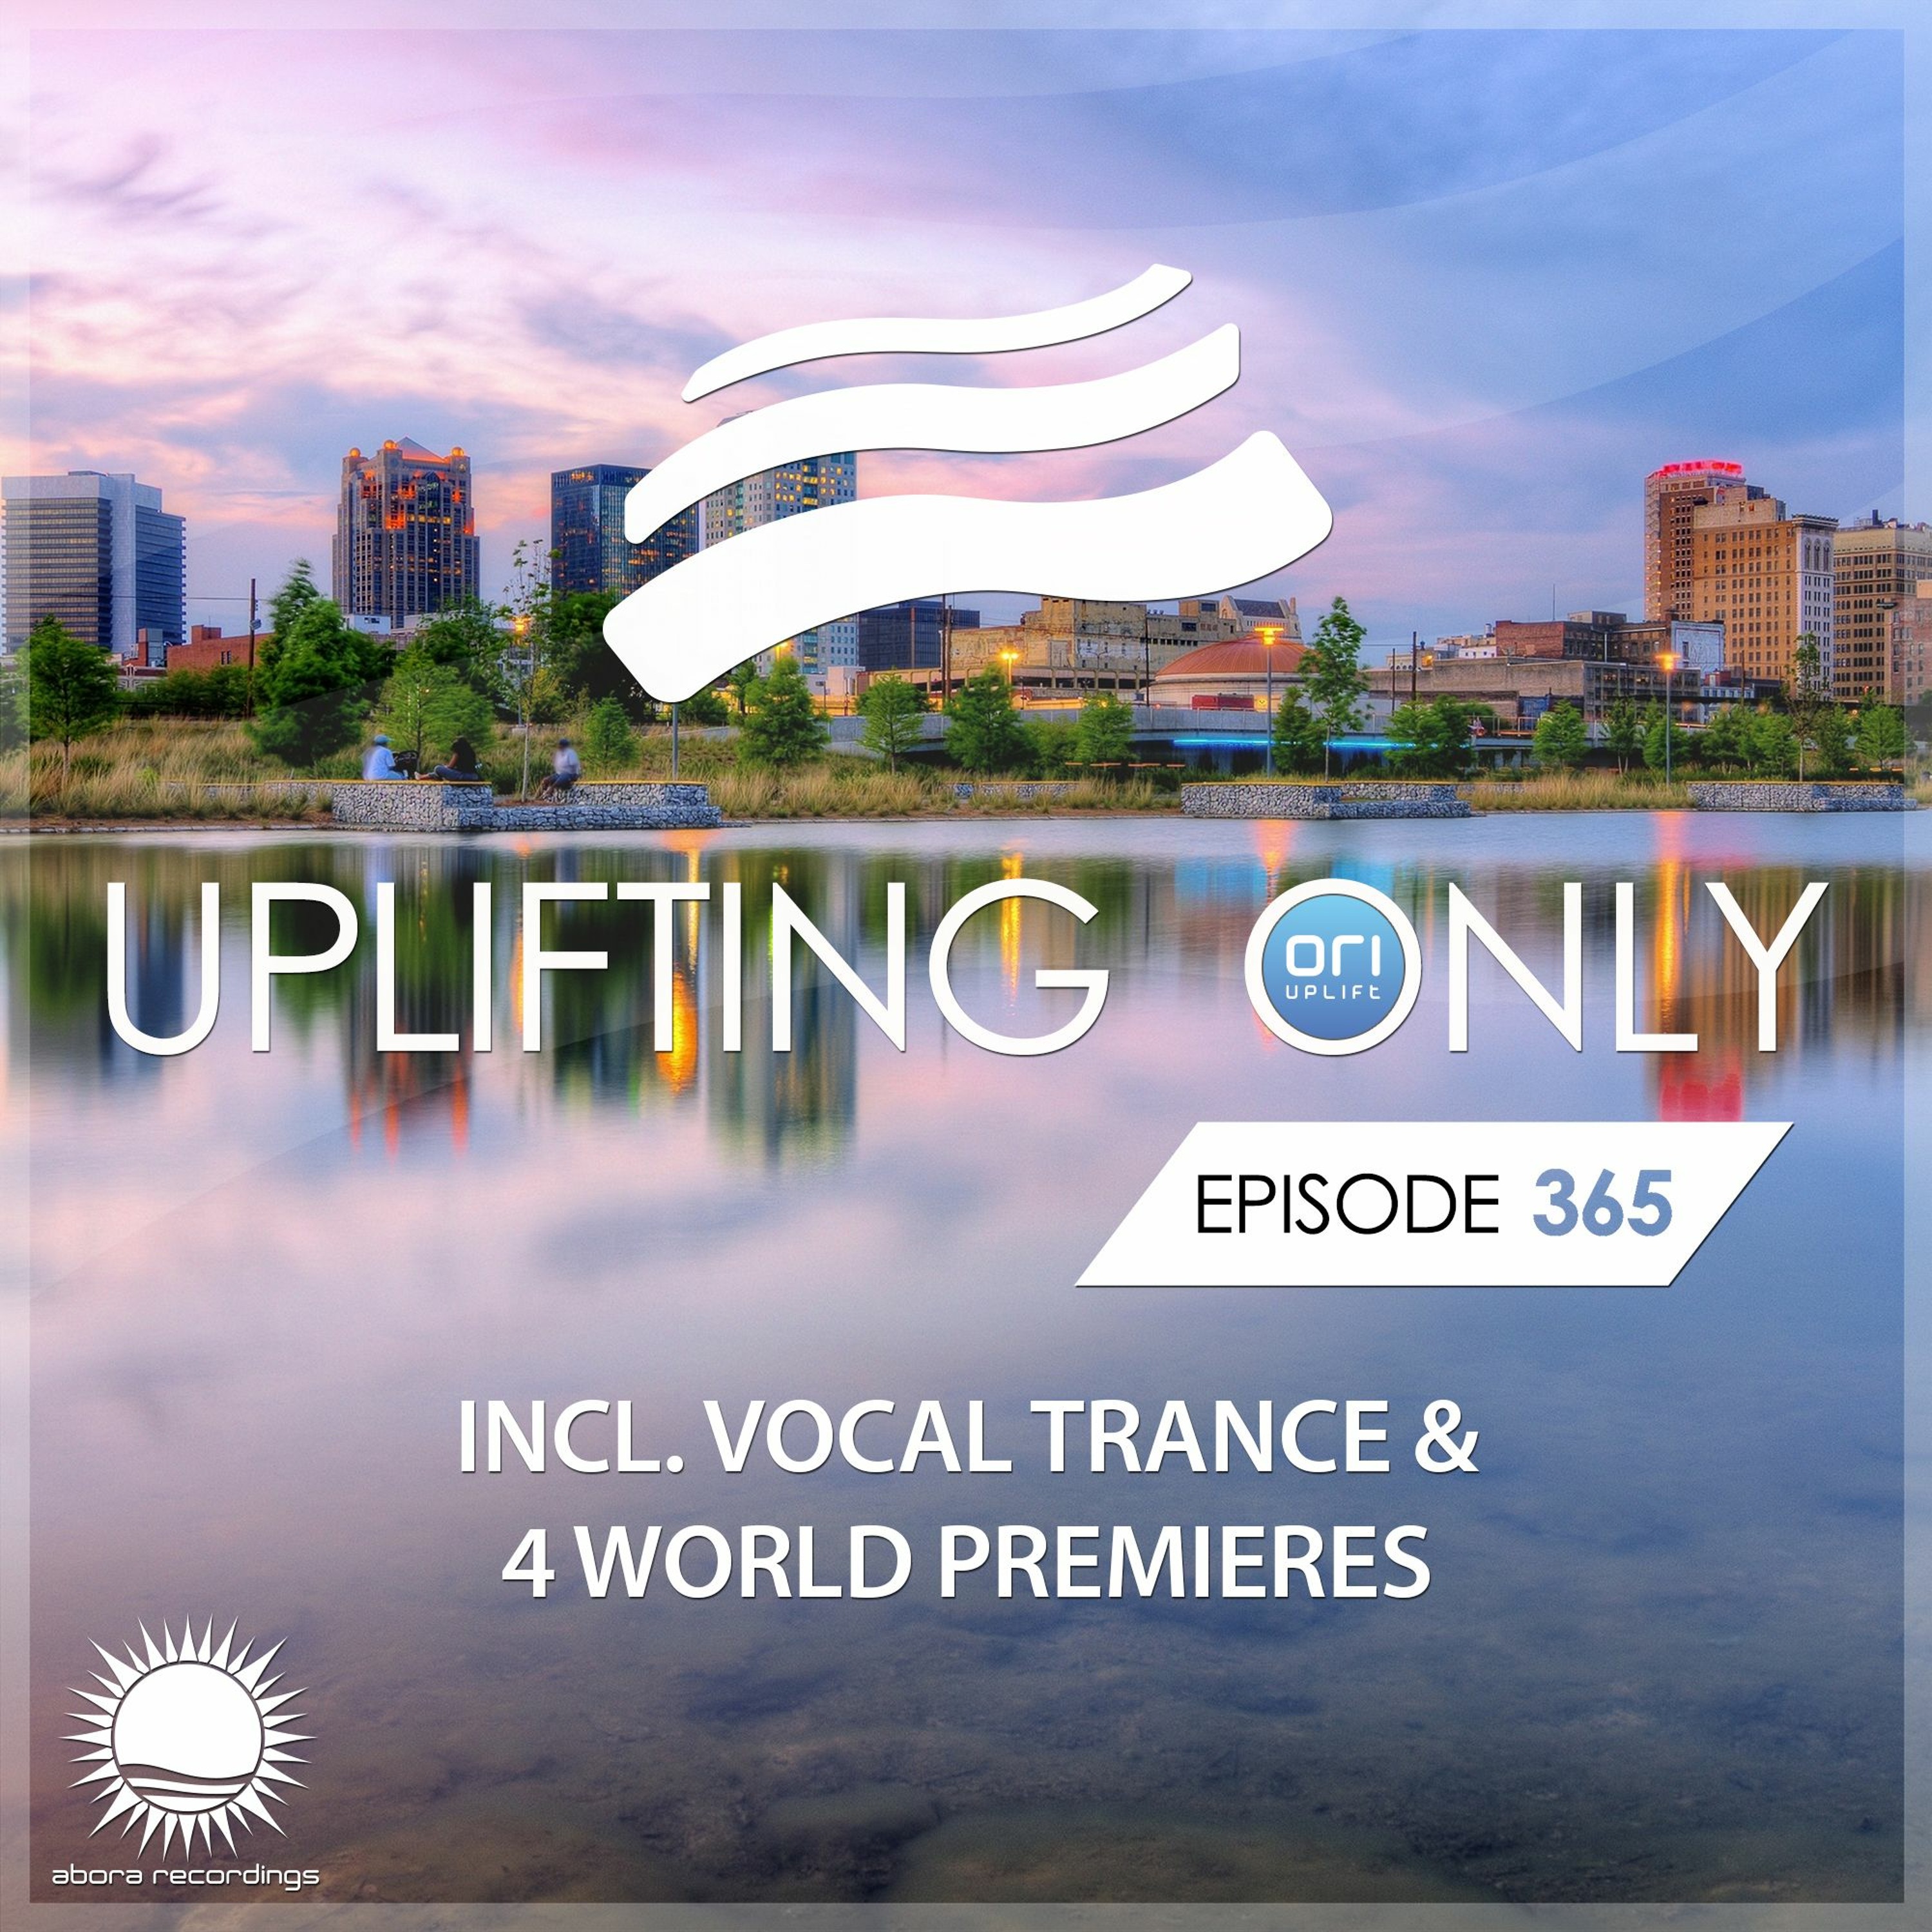 Uplifting Only 365 (Feb 6, 2020) [incl. Vocal Trance]